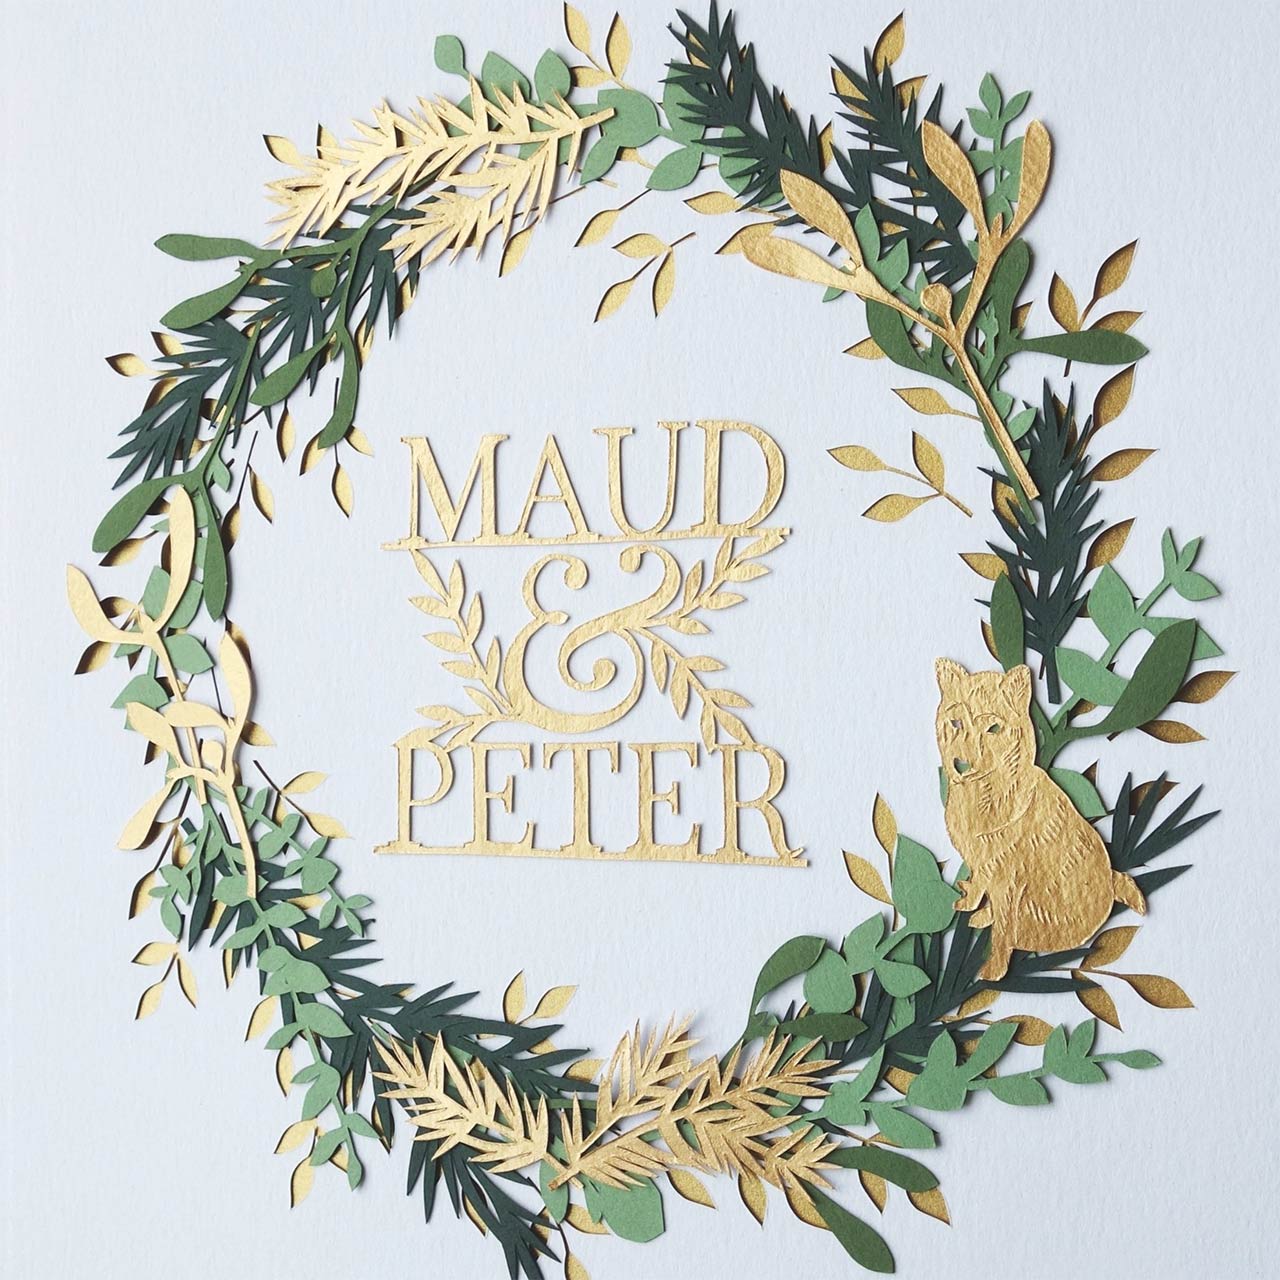 paper cut art work with green leaves in a circle with the names Maud & Peter in gold in the middle